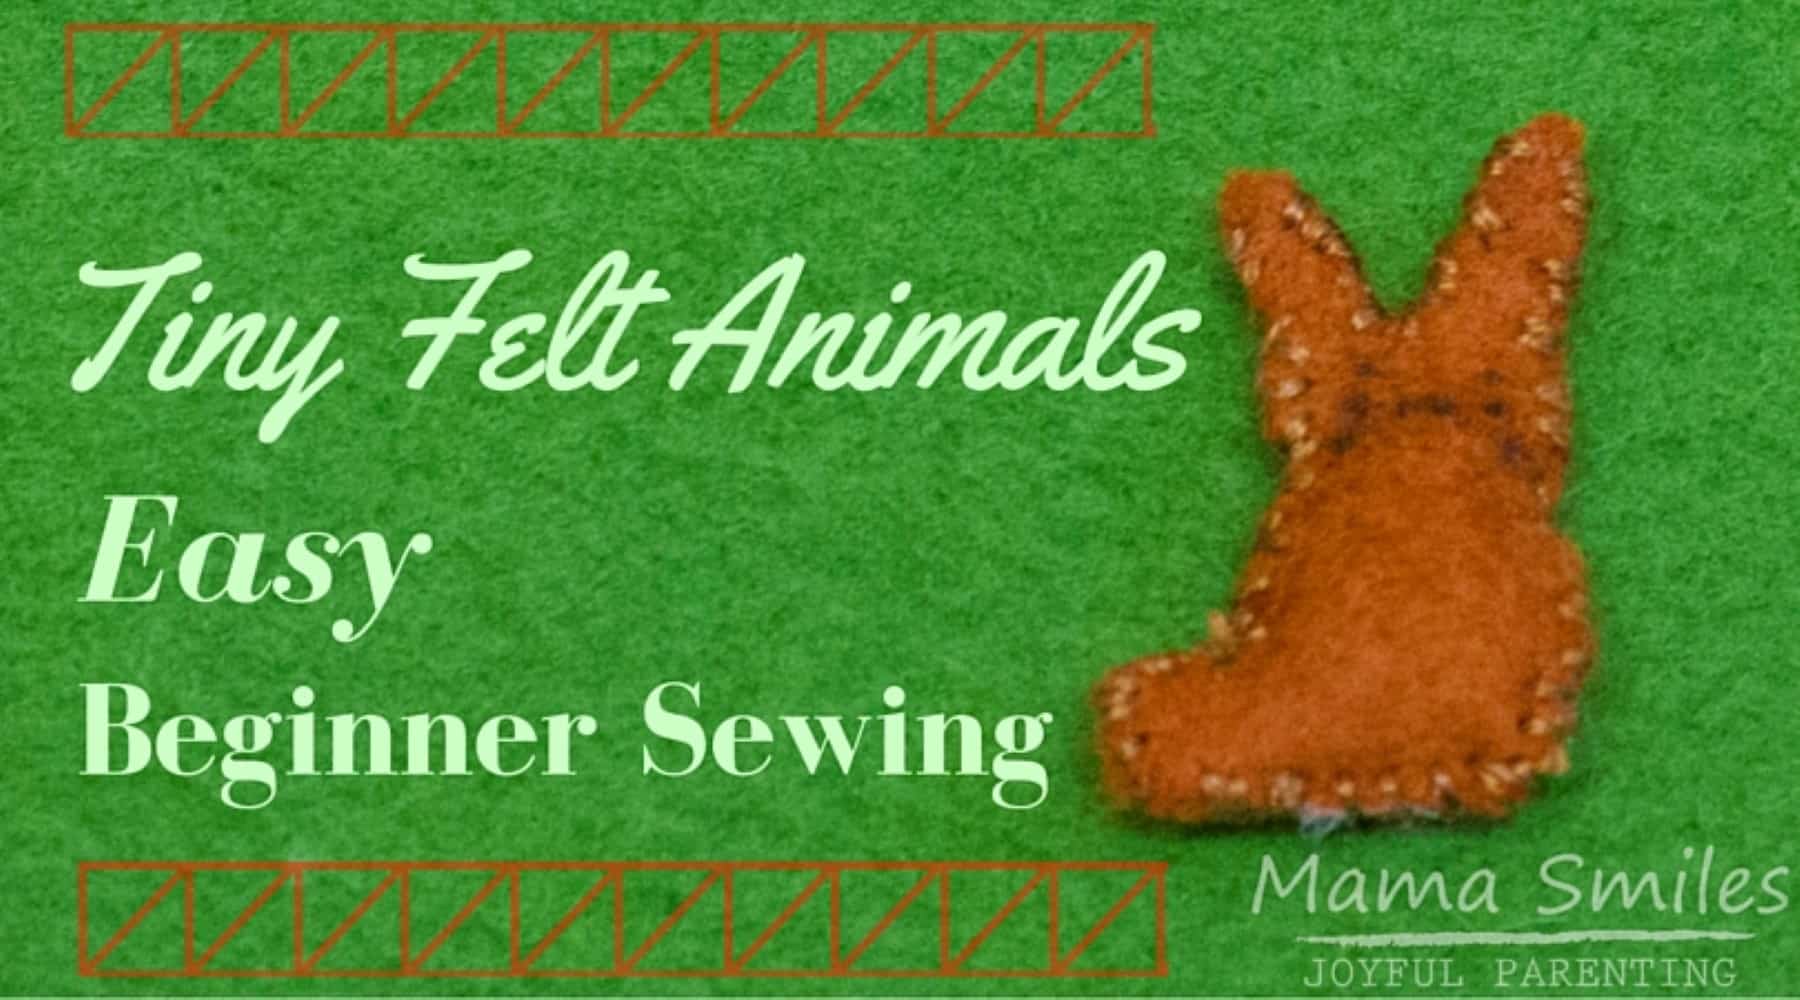 These tiny felt animals make the perfect quick and easy first sewing project